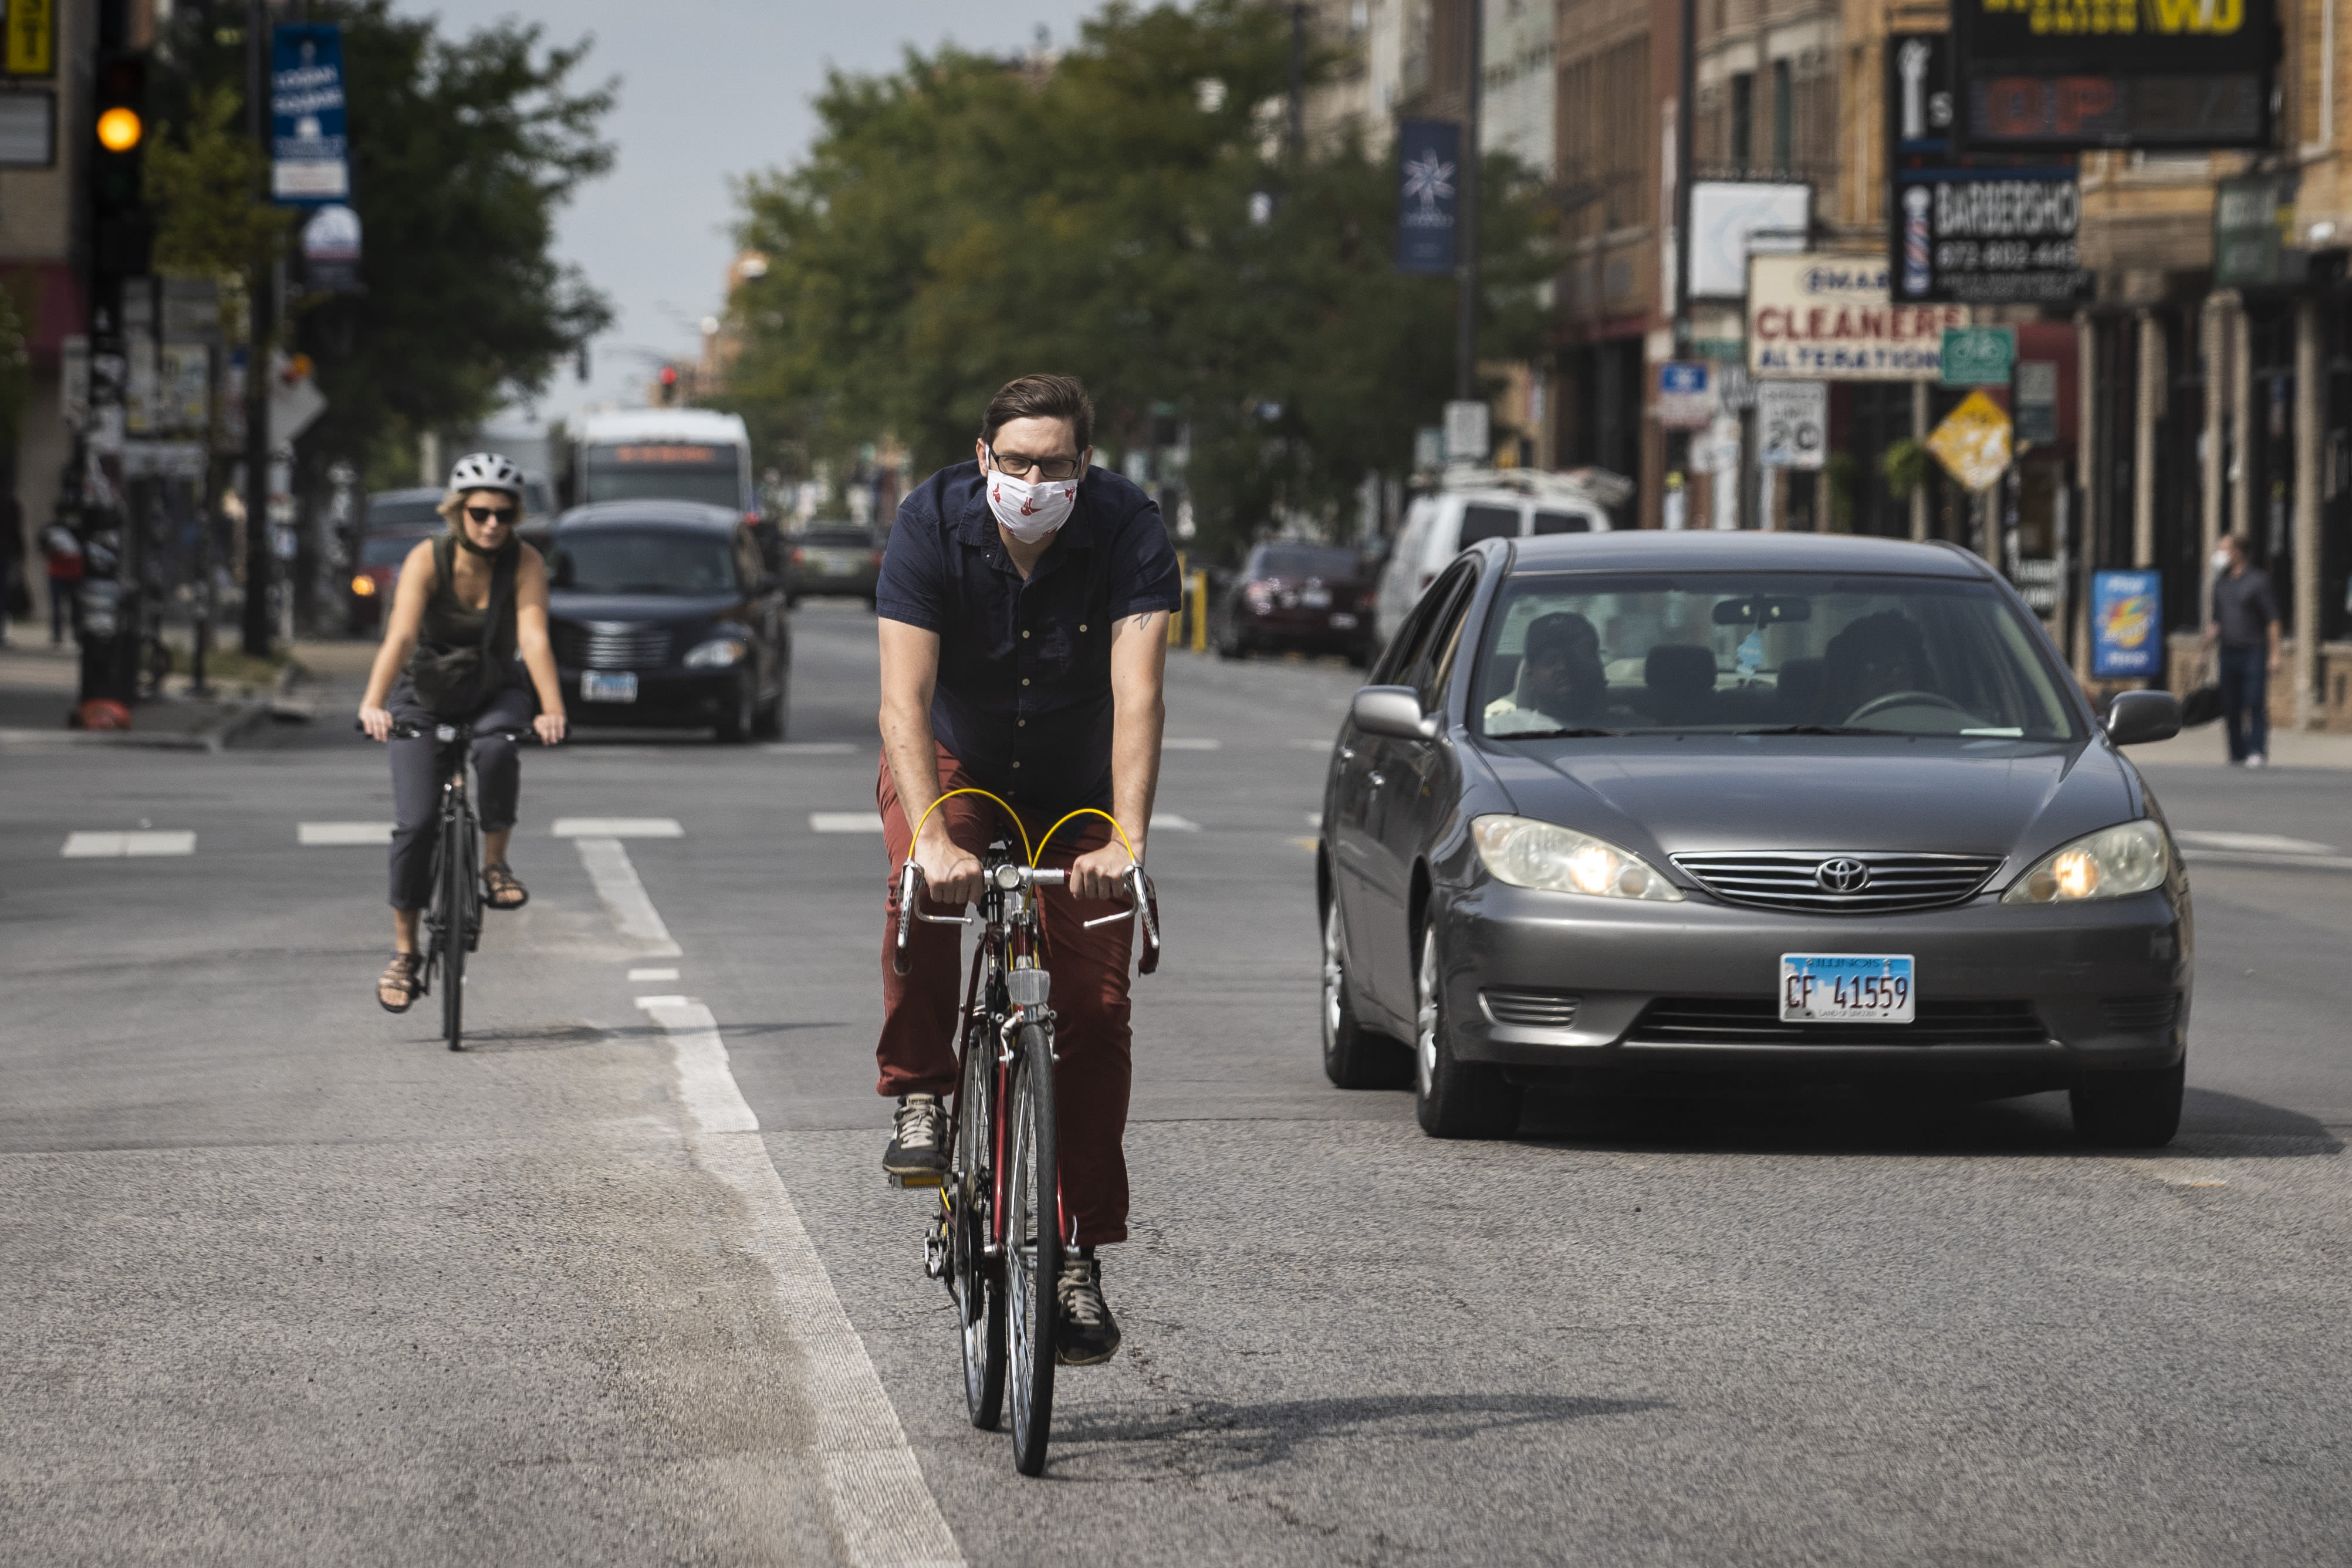 Pedal mettle? Bicycling in Chicago doubled in 5 years, but bikers still worry about safety